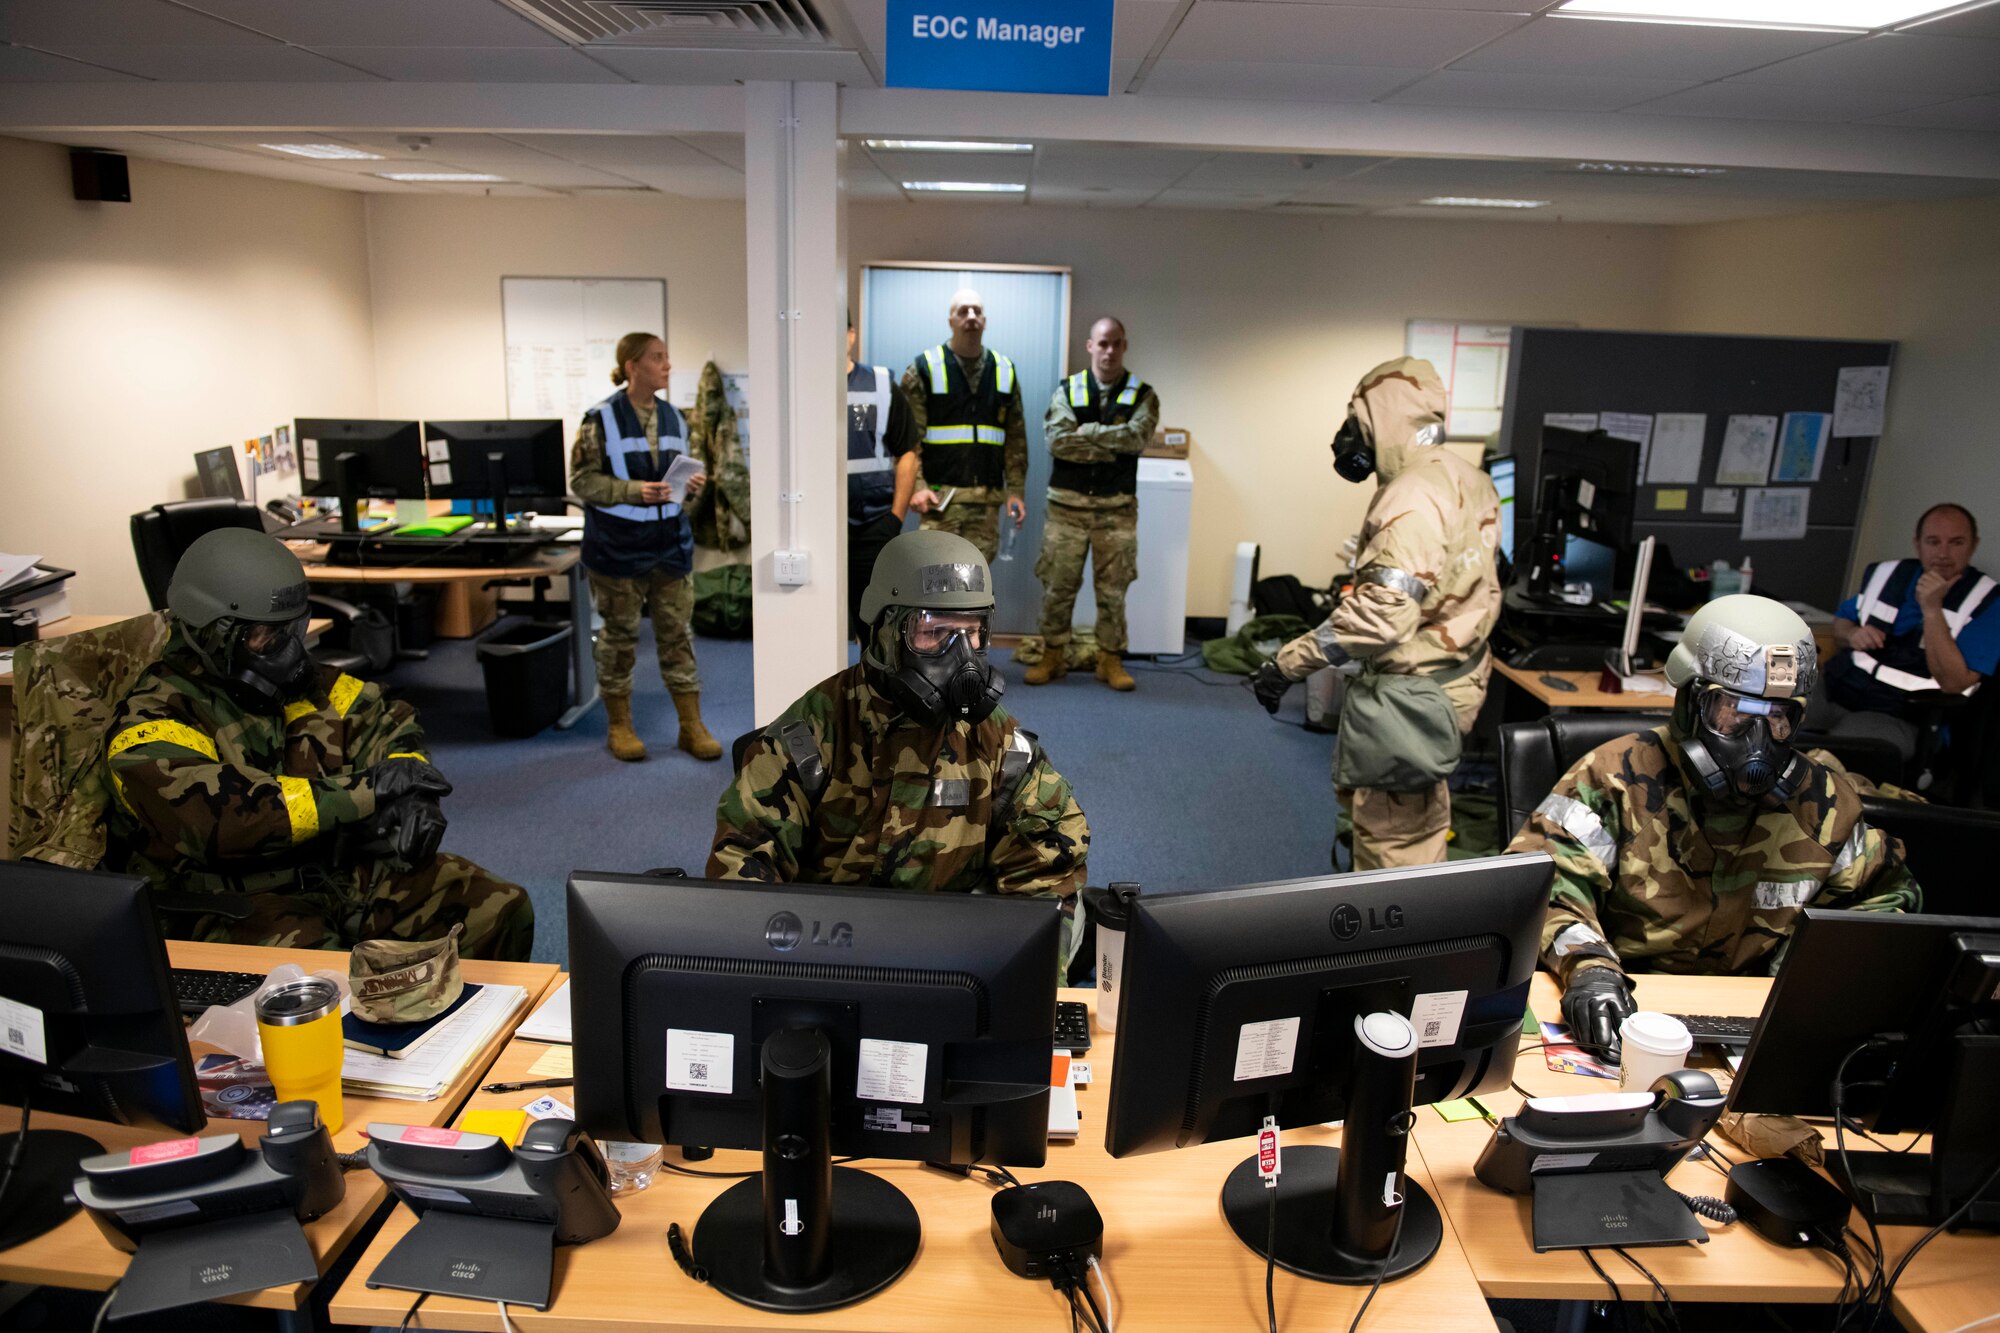 Members of the Emergency Operations Center work together during an exercise at RAF Alconbury, England, Nov. 17, 2022. The EOC is the command and control hub for emergency operations on base. Airmen across the 501st Combat Support Wing took part in a readiness exercise to test various capabilities, identify areas for improvement and strengthen operations. (U.S. Air Force photo by Senior Airman Jennifer Zima)